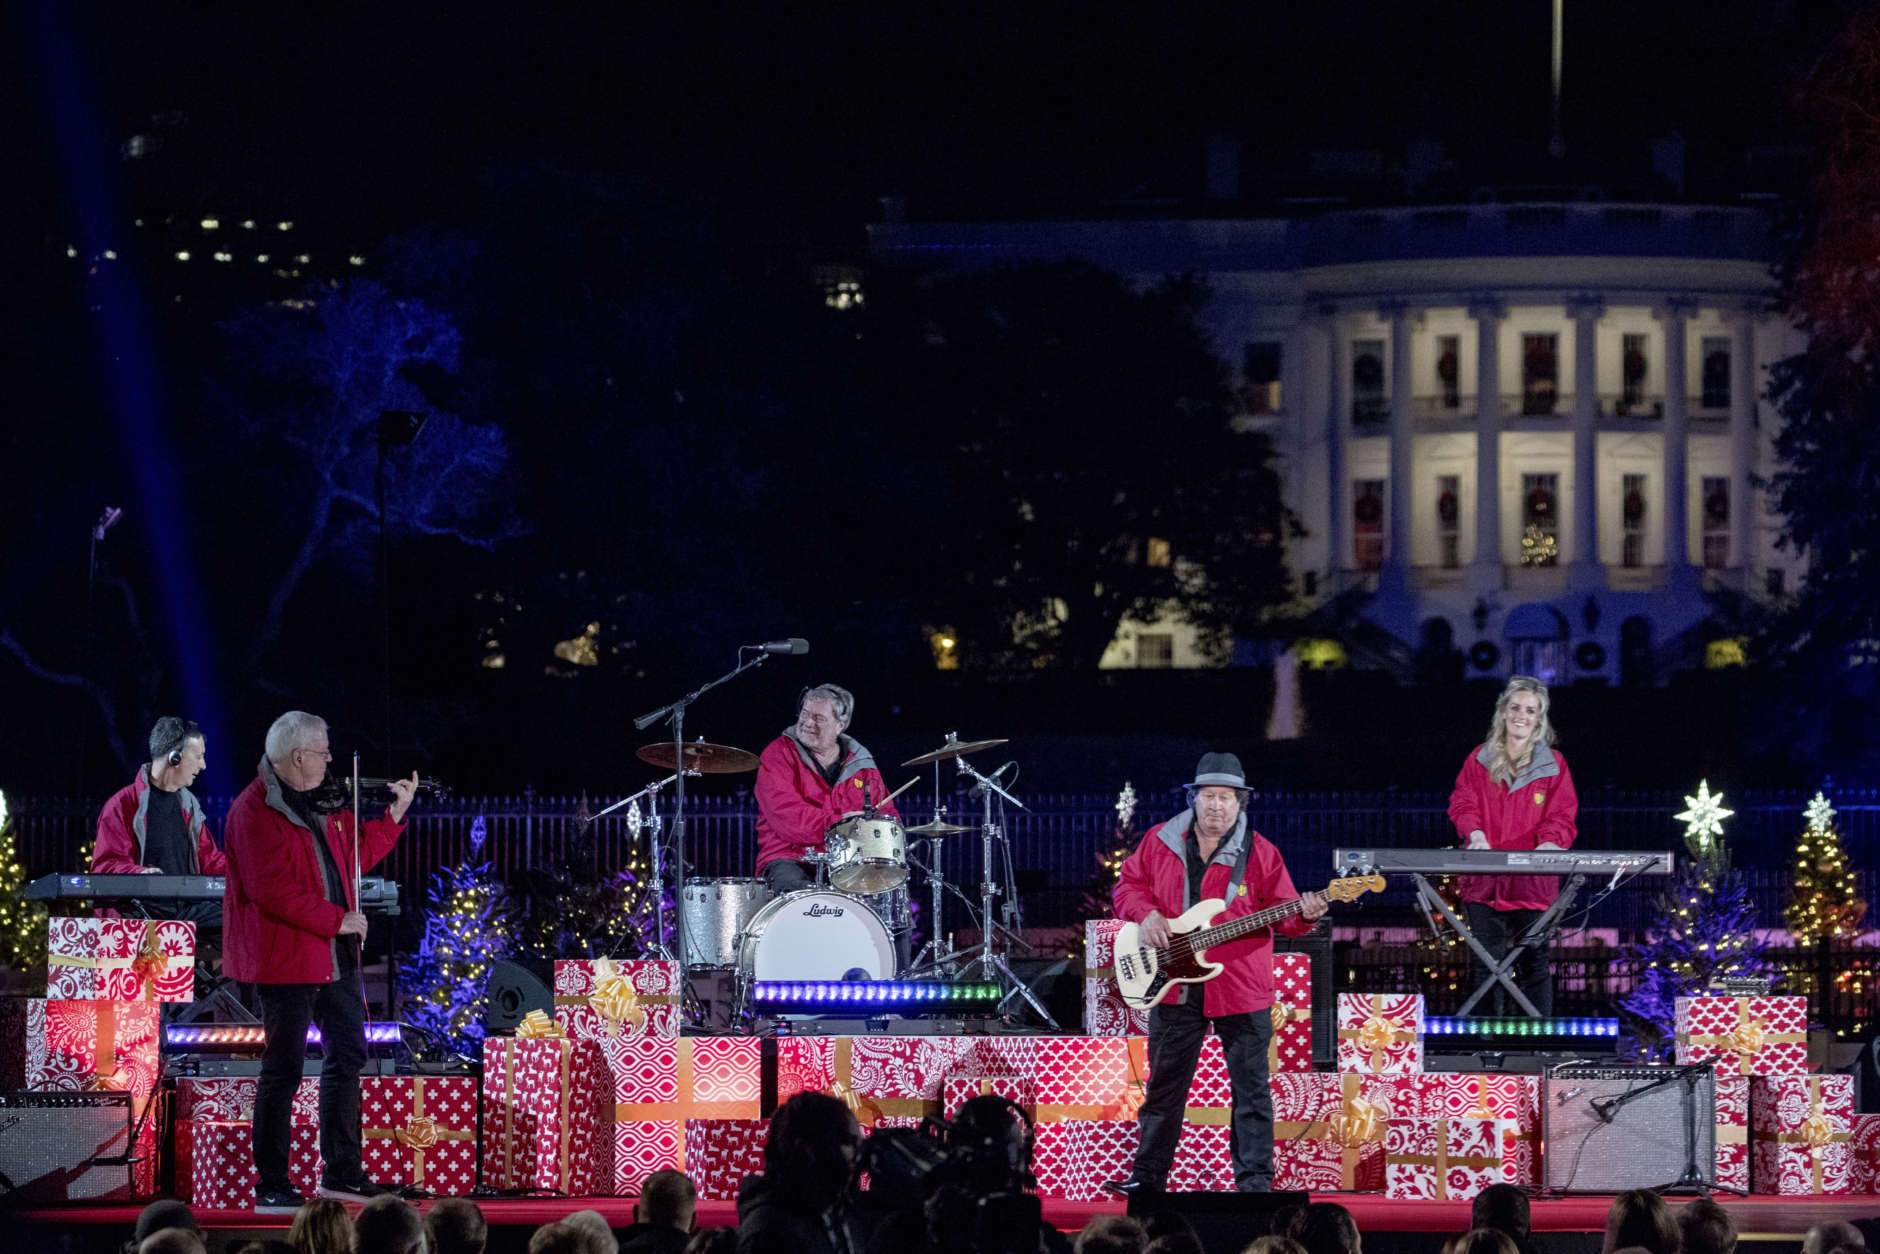 Chip Davis and the Mannheim Steamroller perform during the lighting ceremony for the 2017 National Christmas Tree on the Ellipse near the White House, Thursday, Nov. 30, 2017, in Washington. (AP Photo/Andrew Harnik)